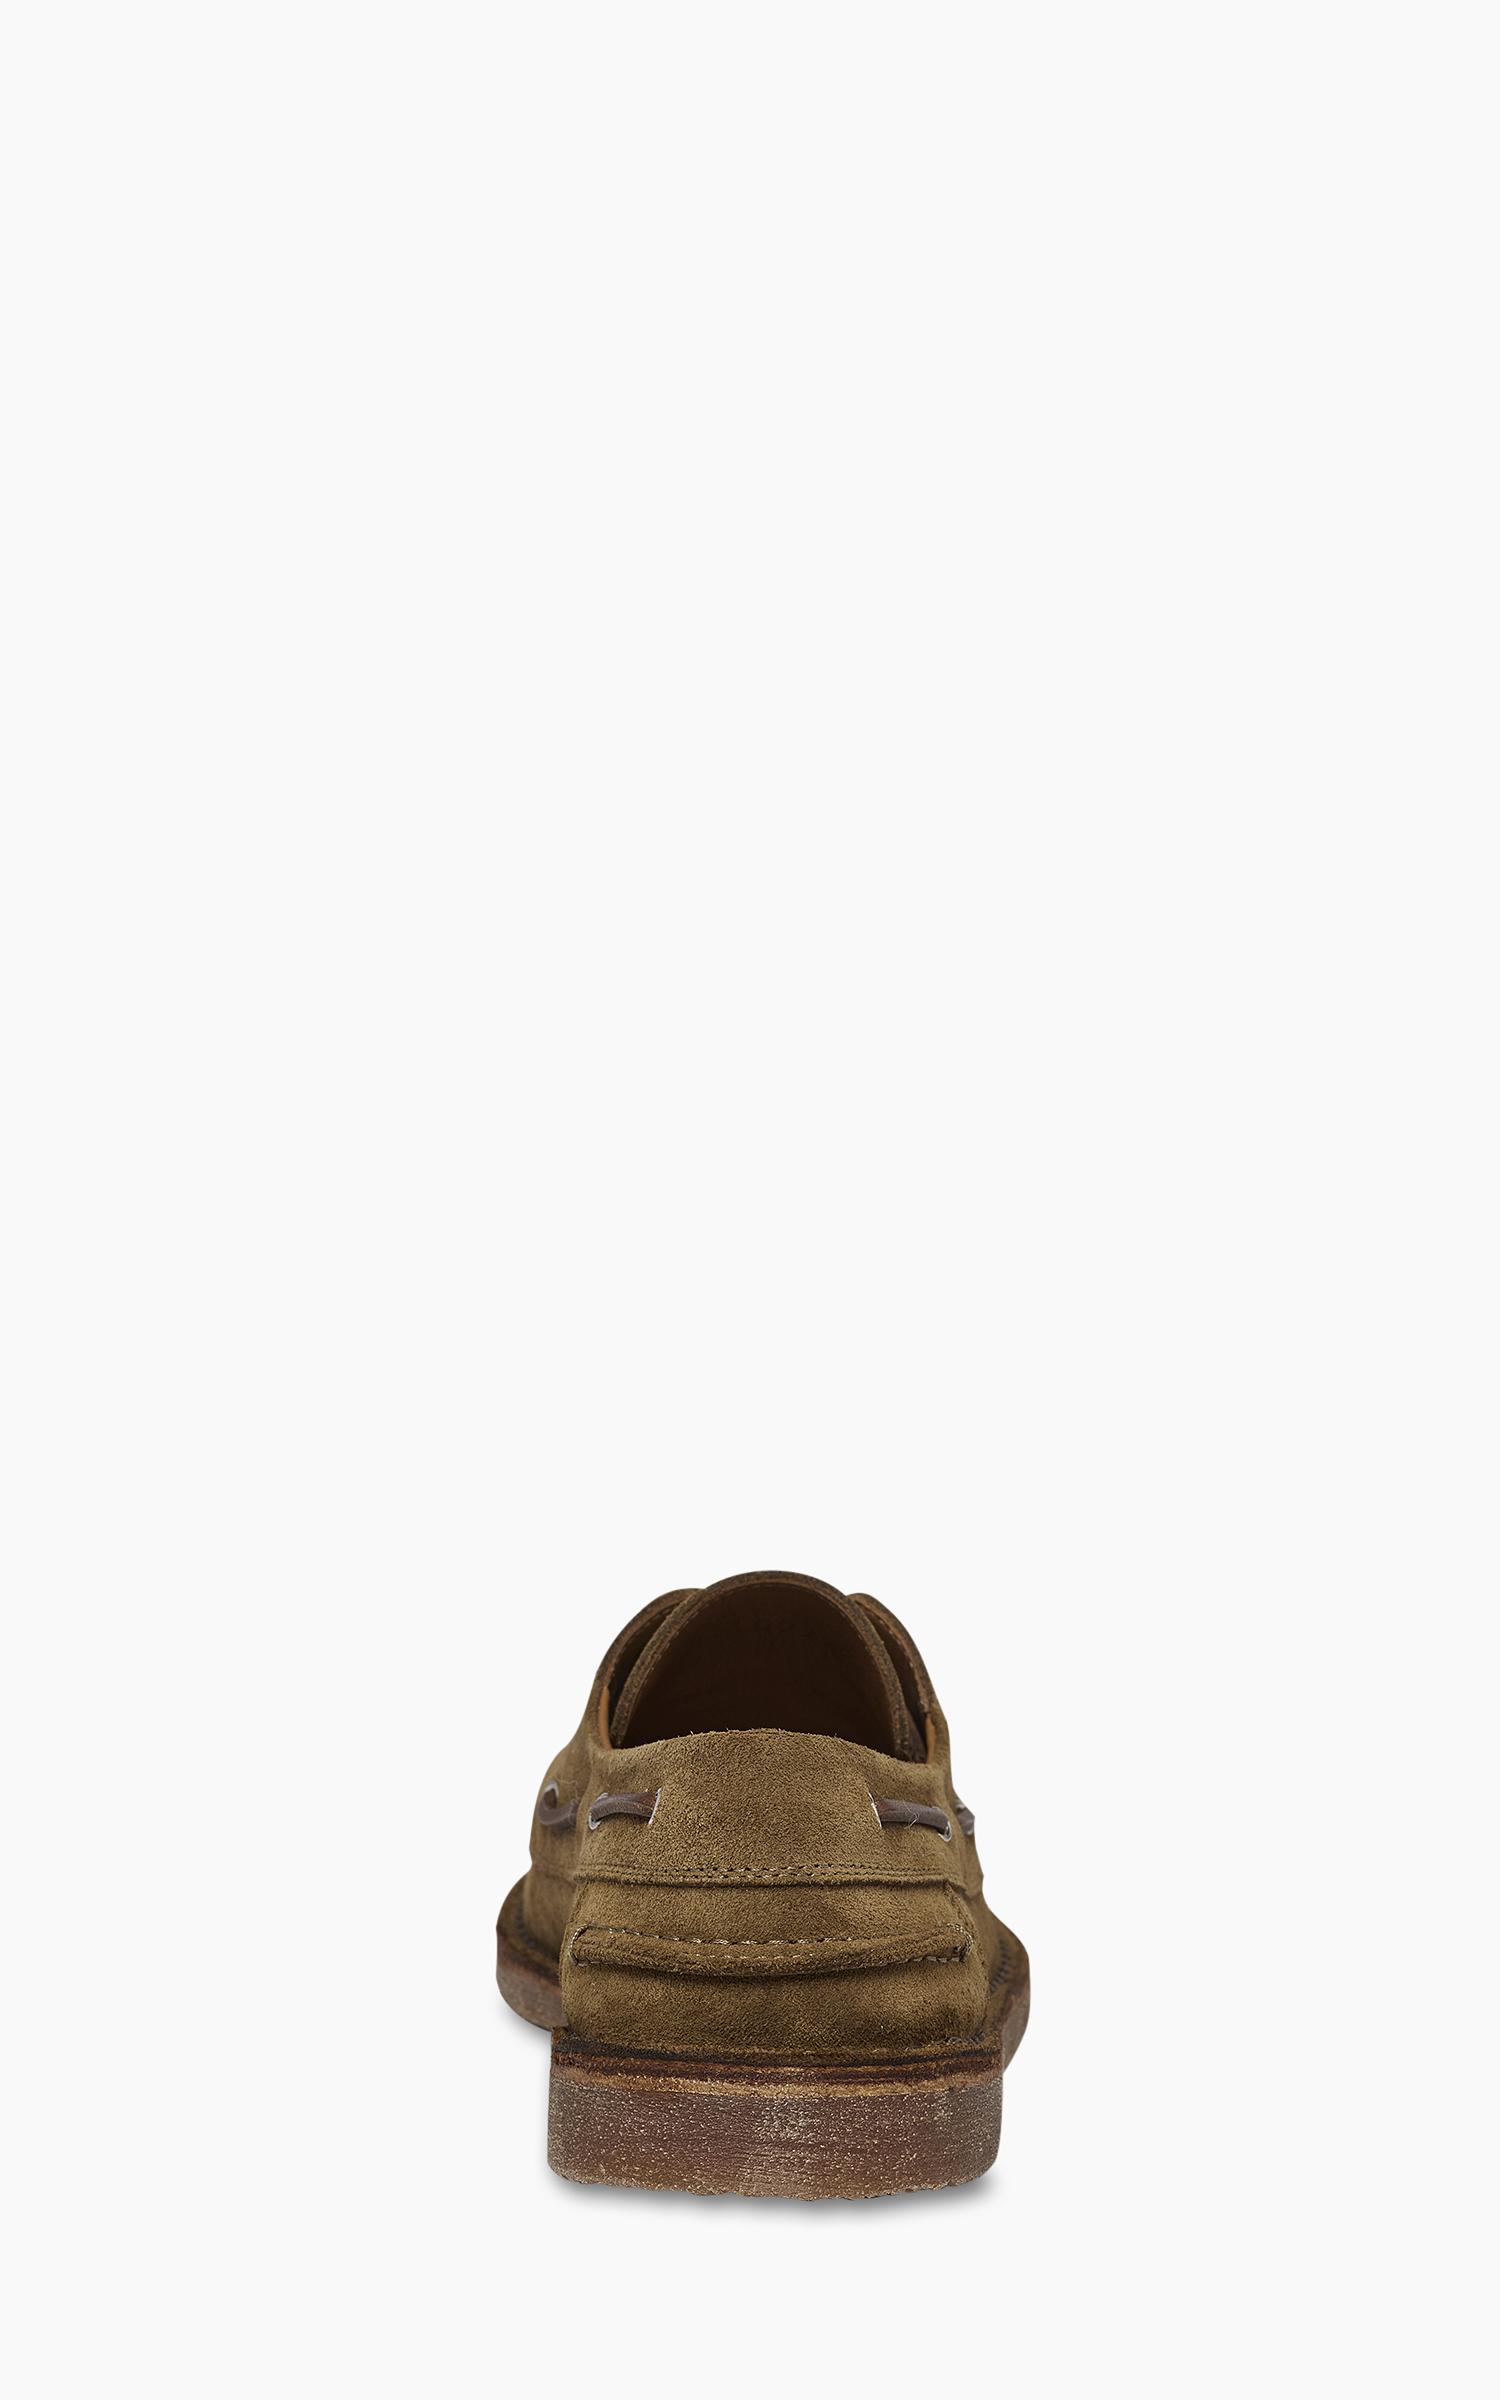 Buttero B9322 Argentario Boat Shoes Suede Curry | Cultizm